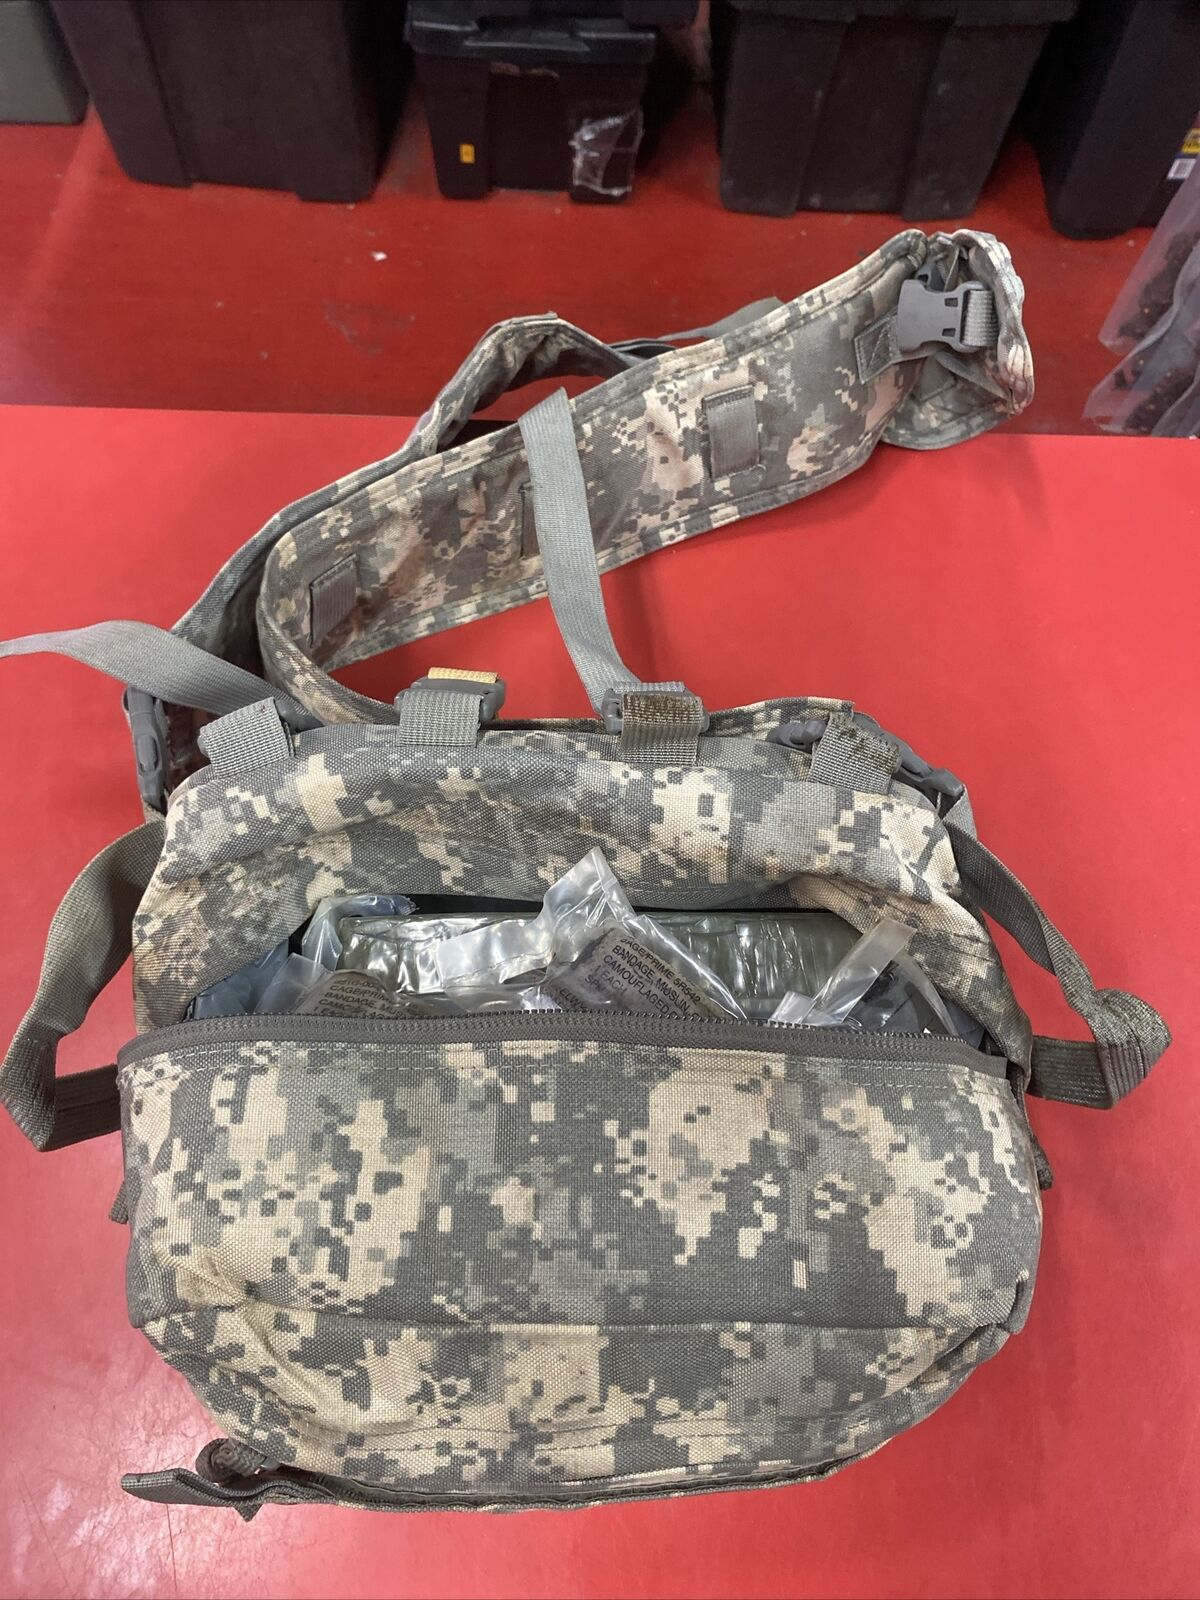 ACU Digital Camo Combat Casualty Care CLS Bag Kit Medic First Aid Lot 2